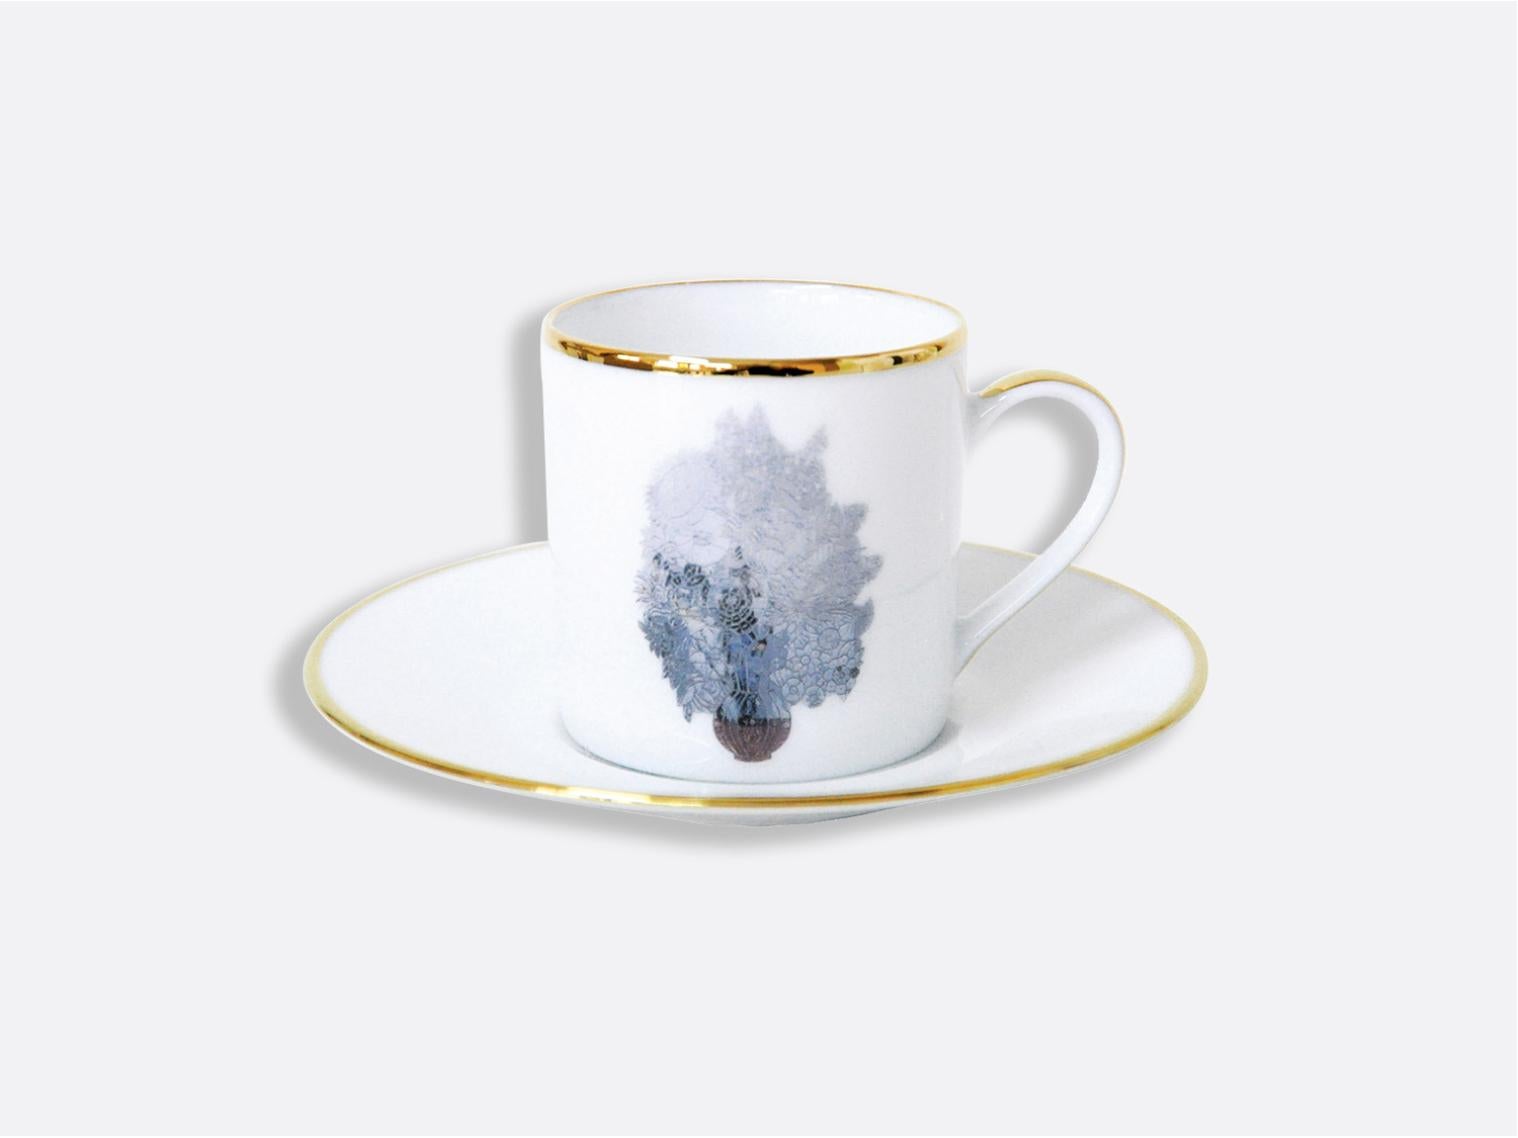 Contemporary Banality Series AD Cup and Saucer Set by Jeff Koons